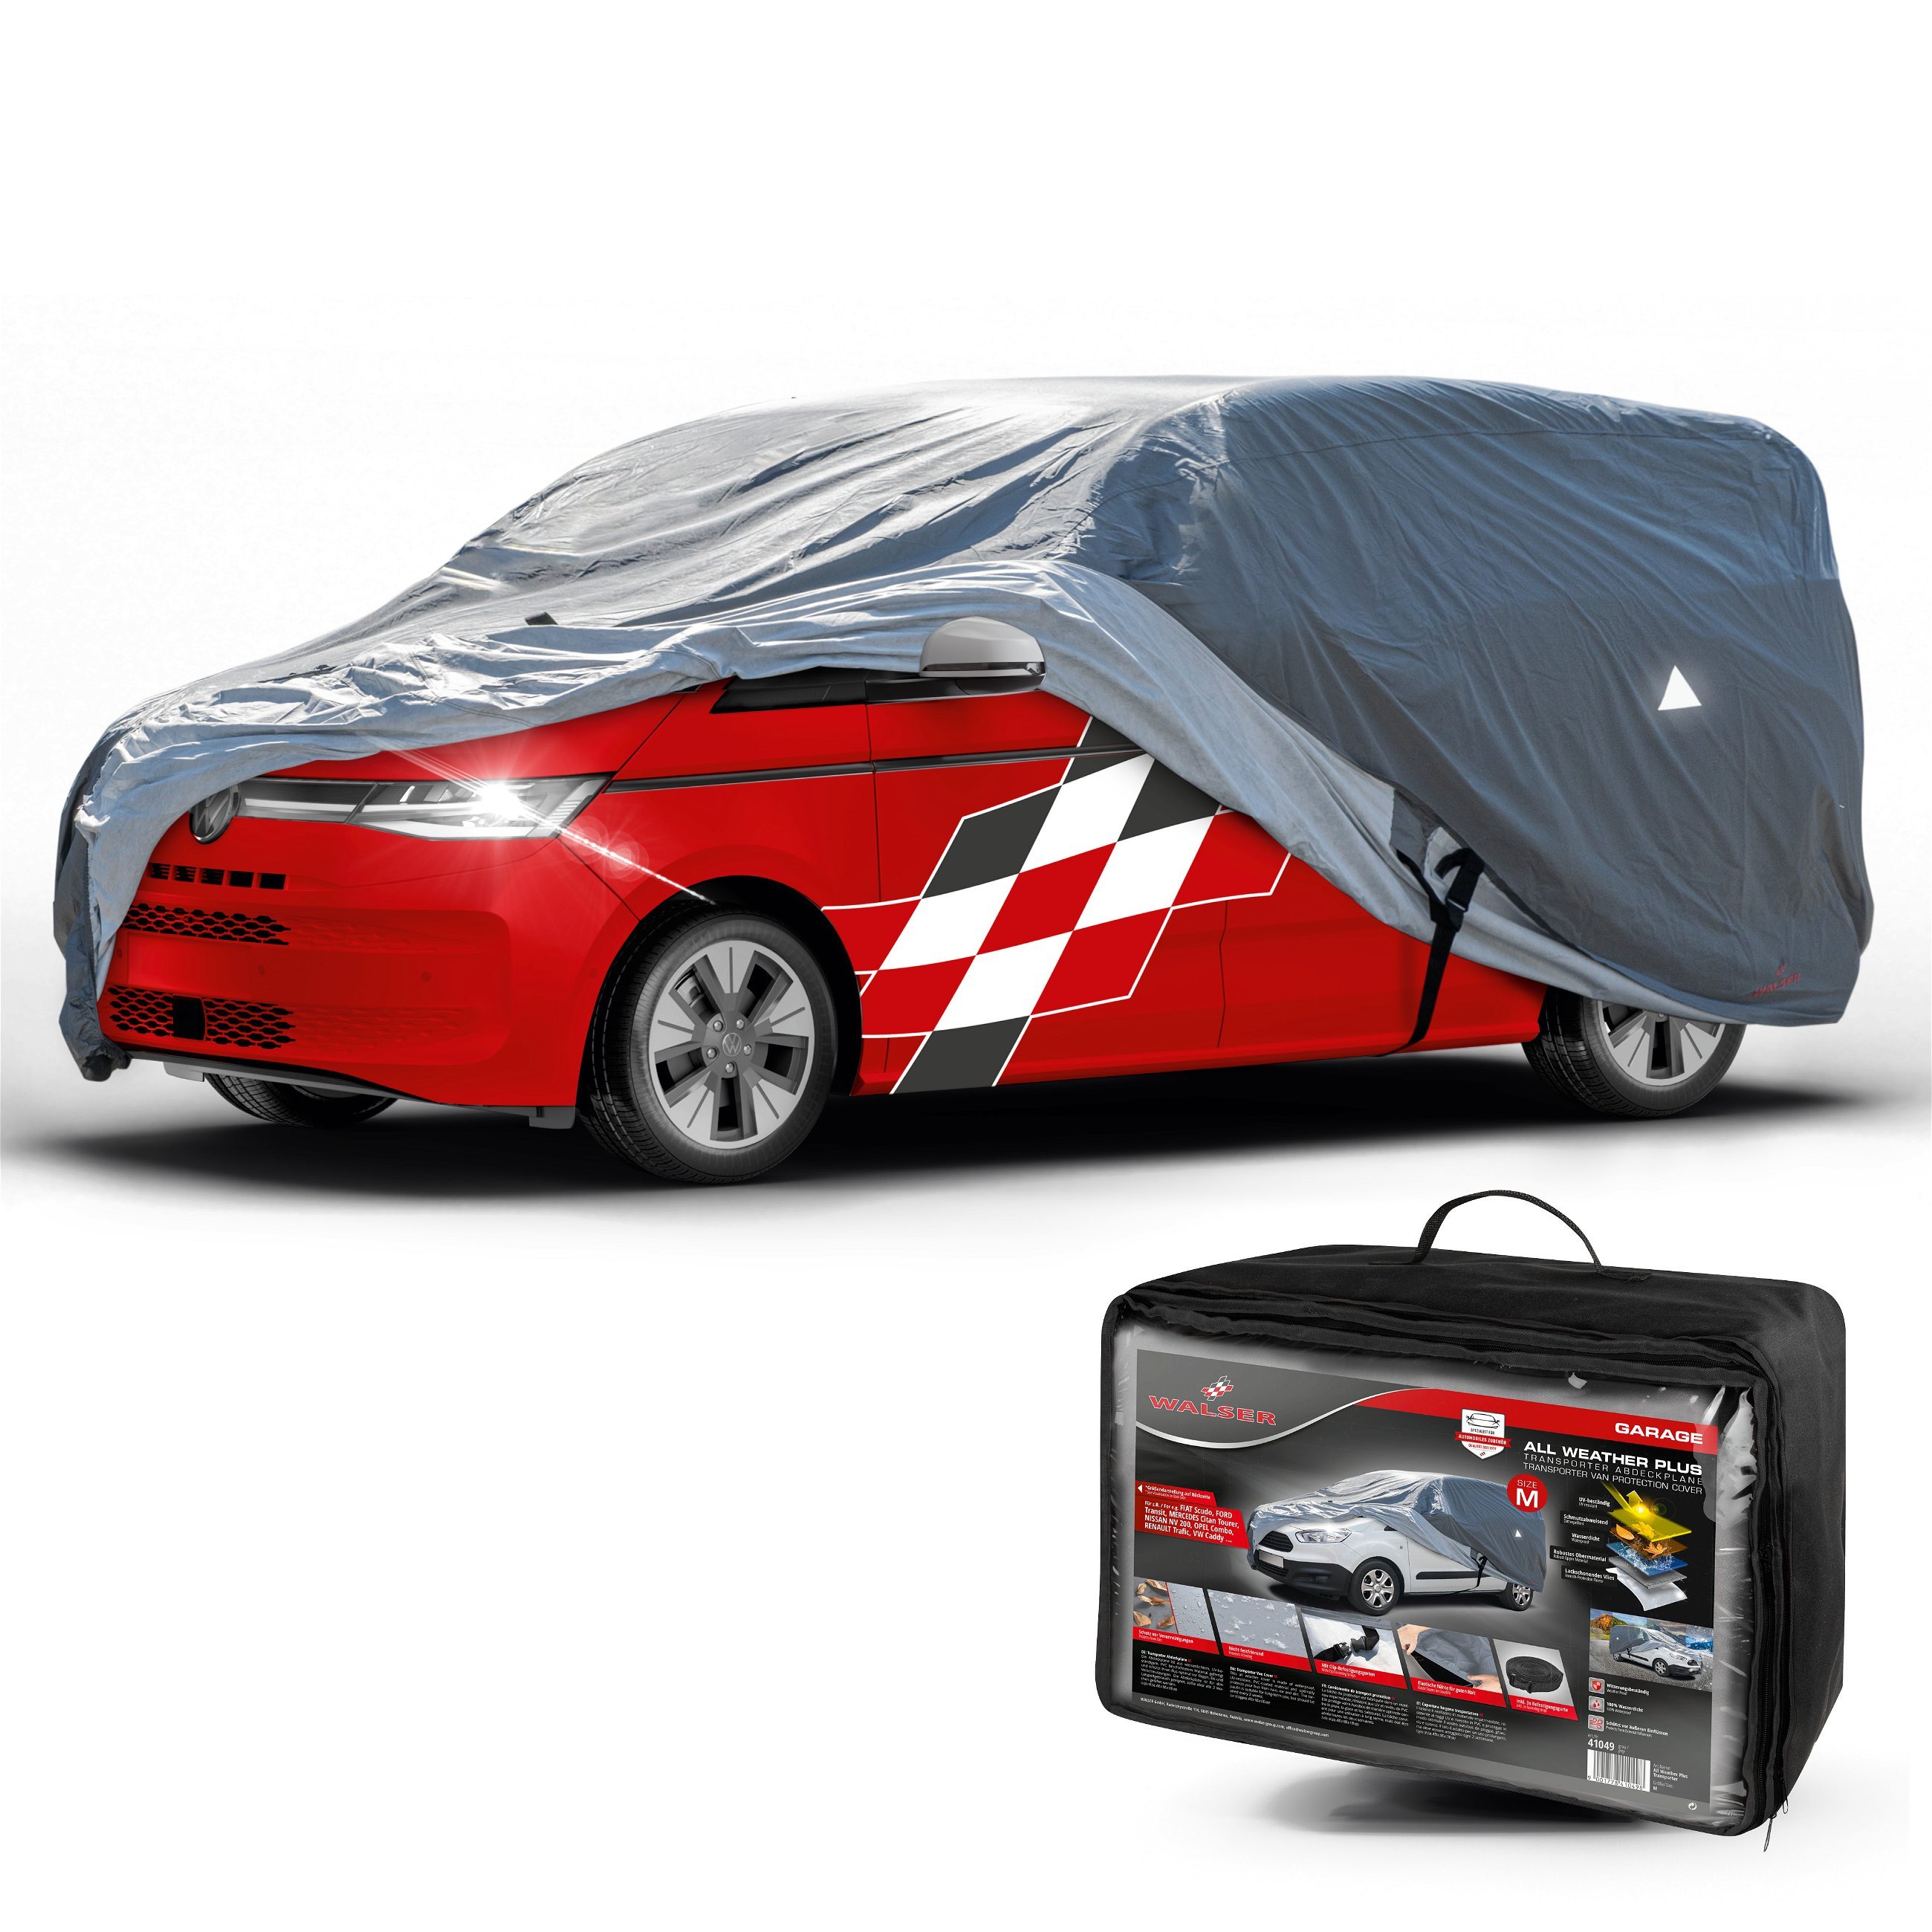 Car cover All Weather Plus, Van cover size L